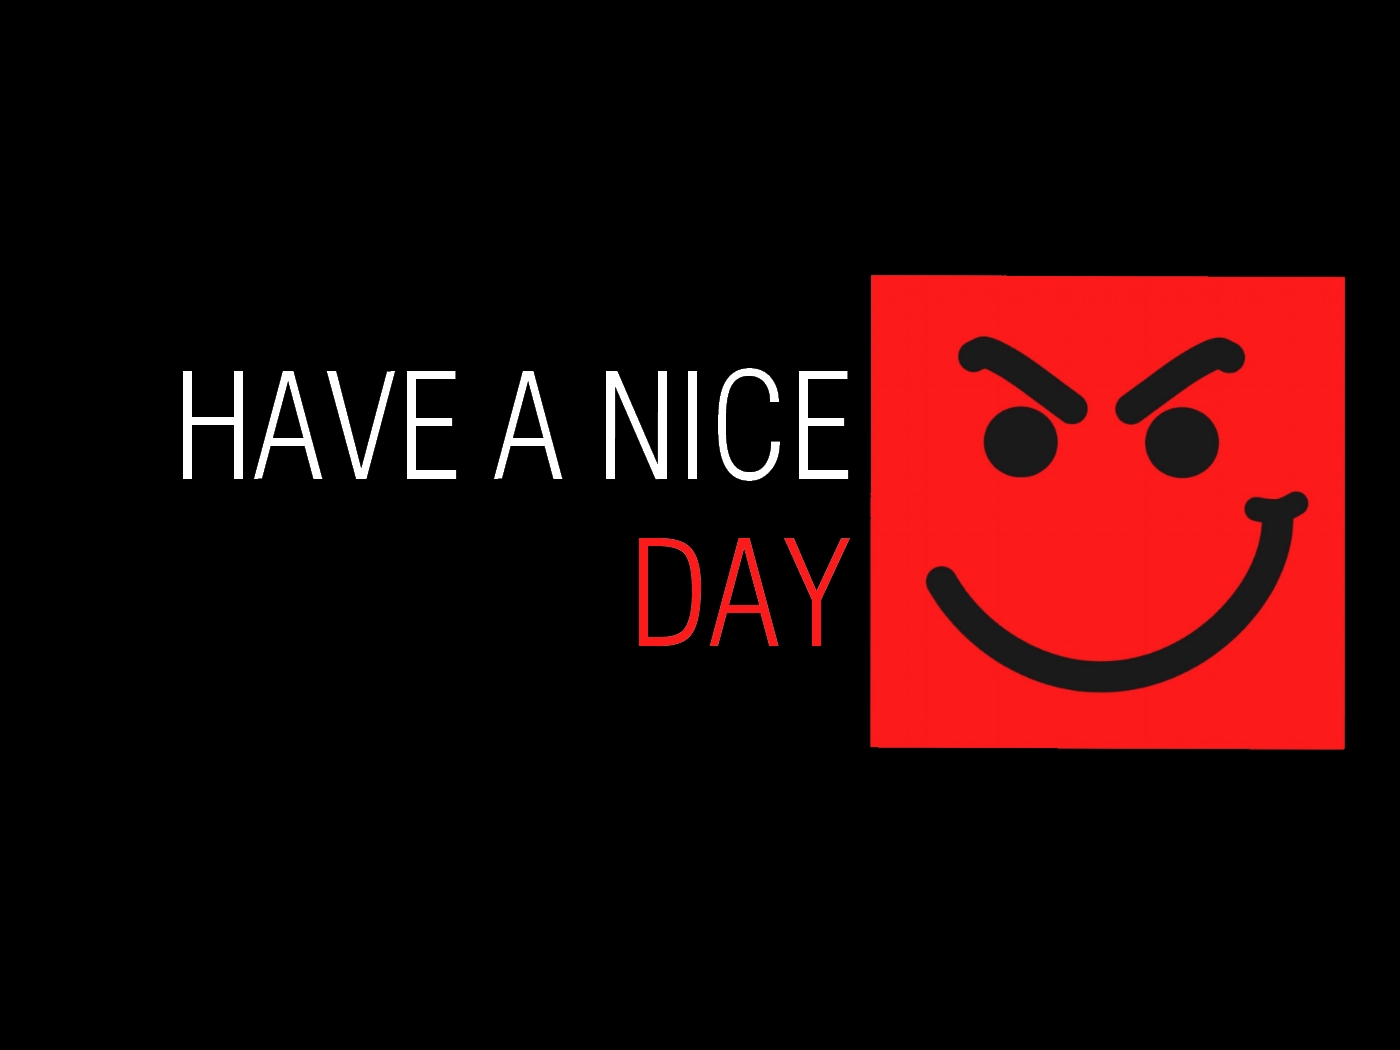 Wallpaper Of Have A Nice Day Desktop Most People In The